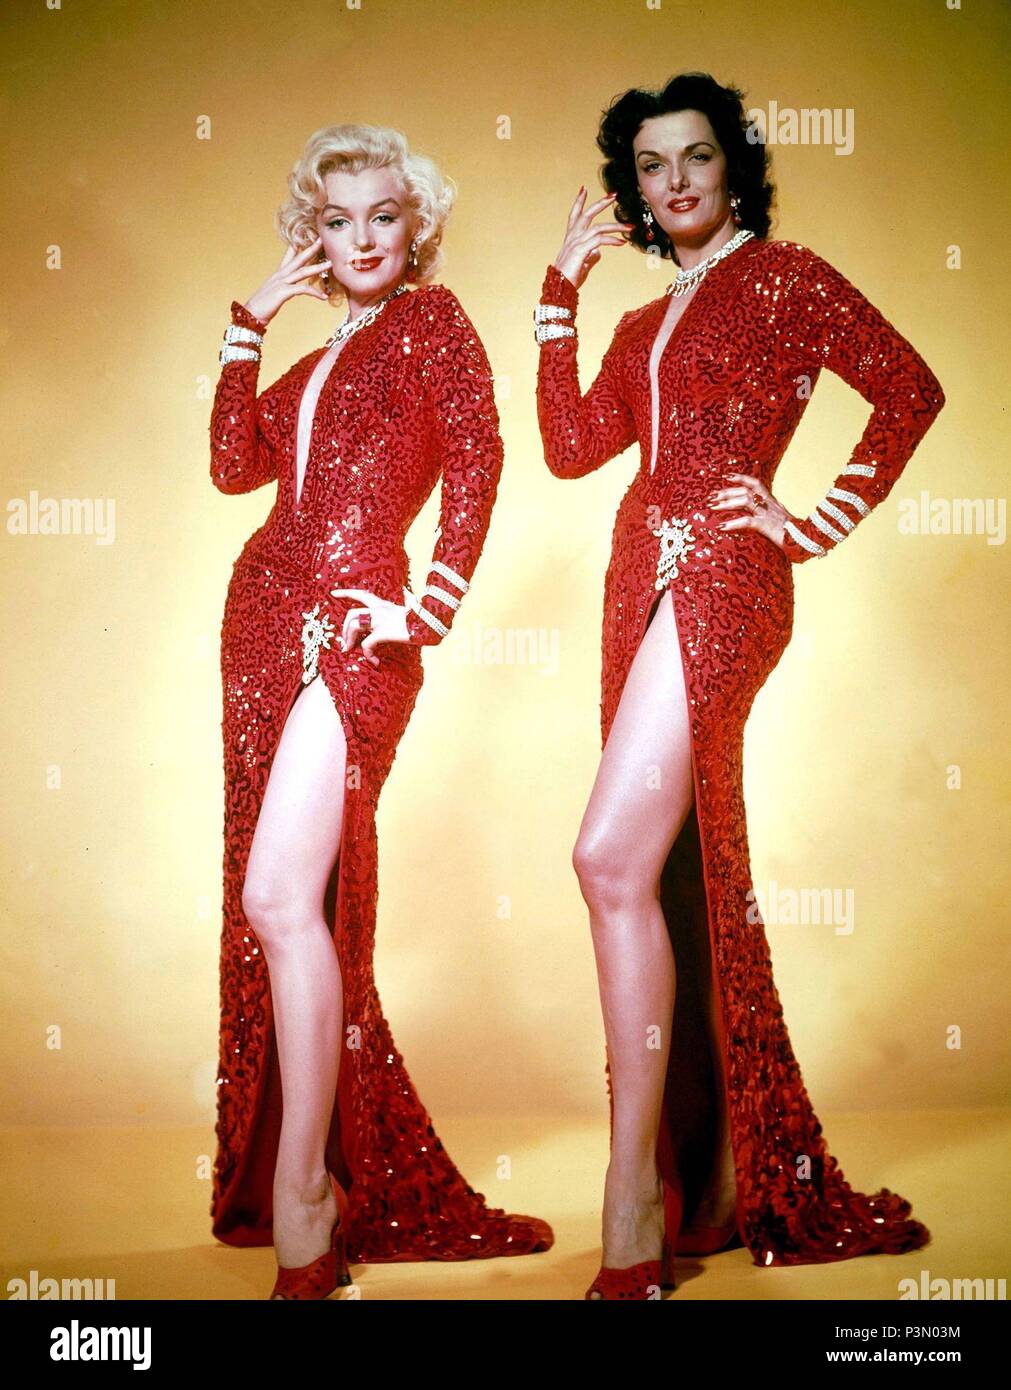 Film Actresses MARILYN MONROE & JANE RUSSELL 8x10 Photo @ Chinese Theater Print 